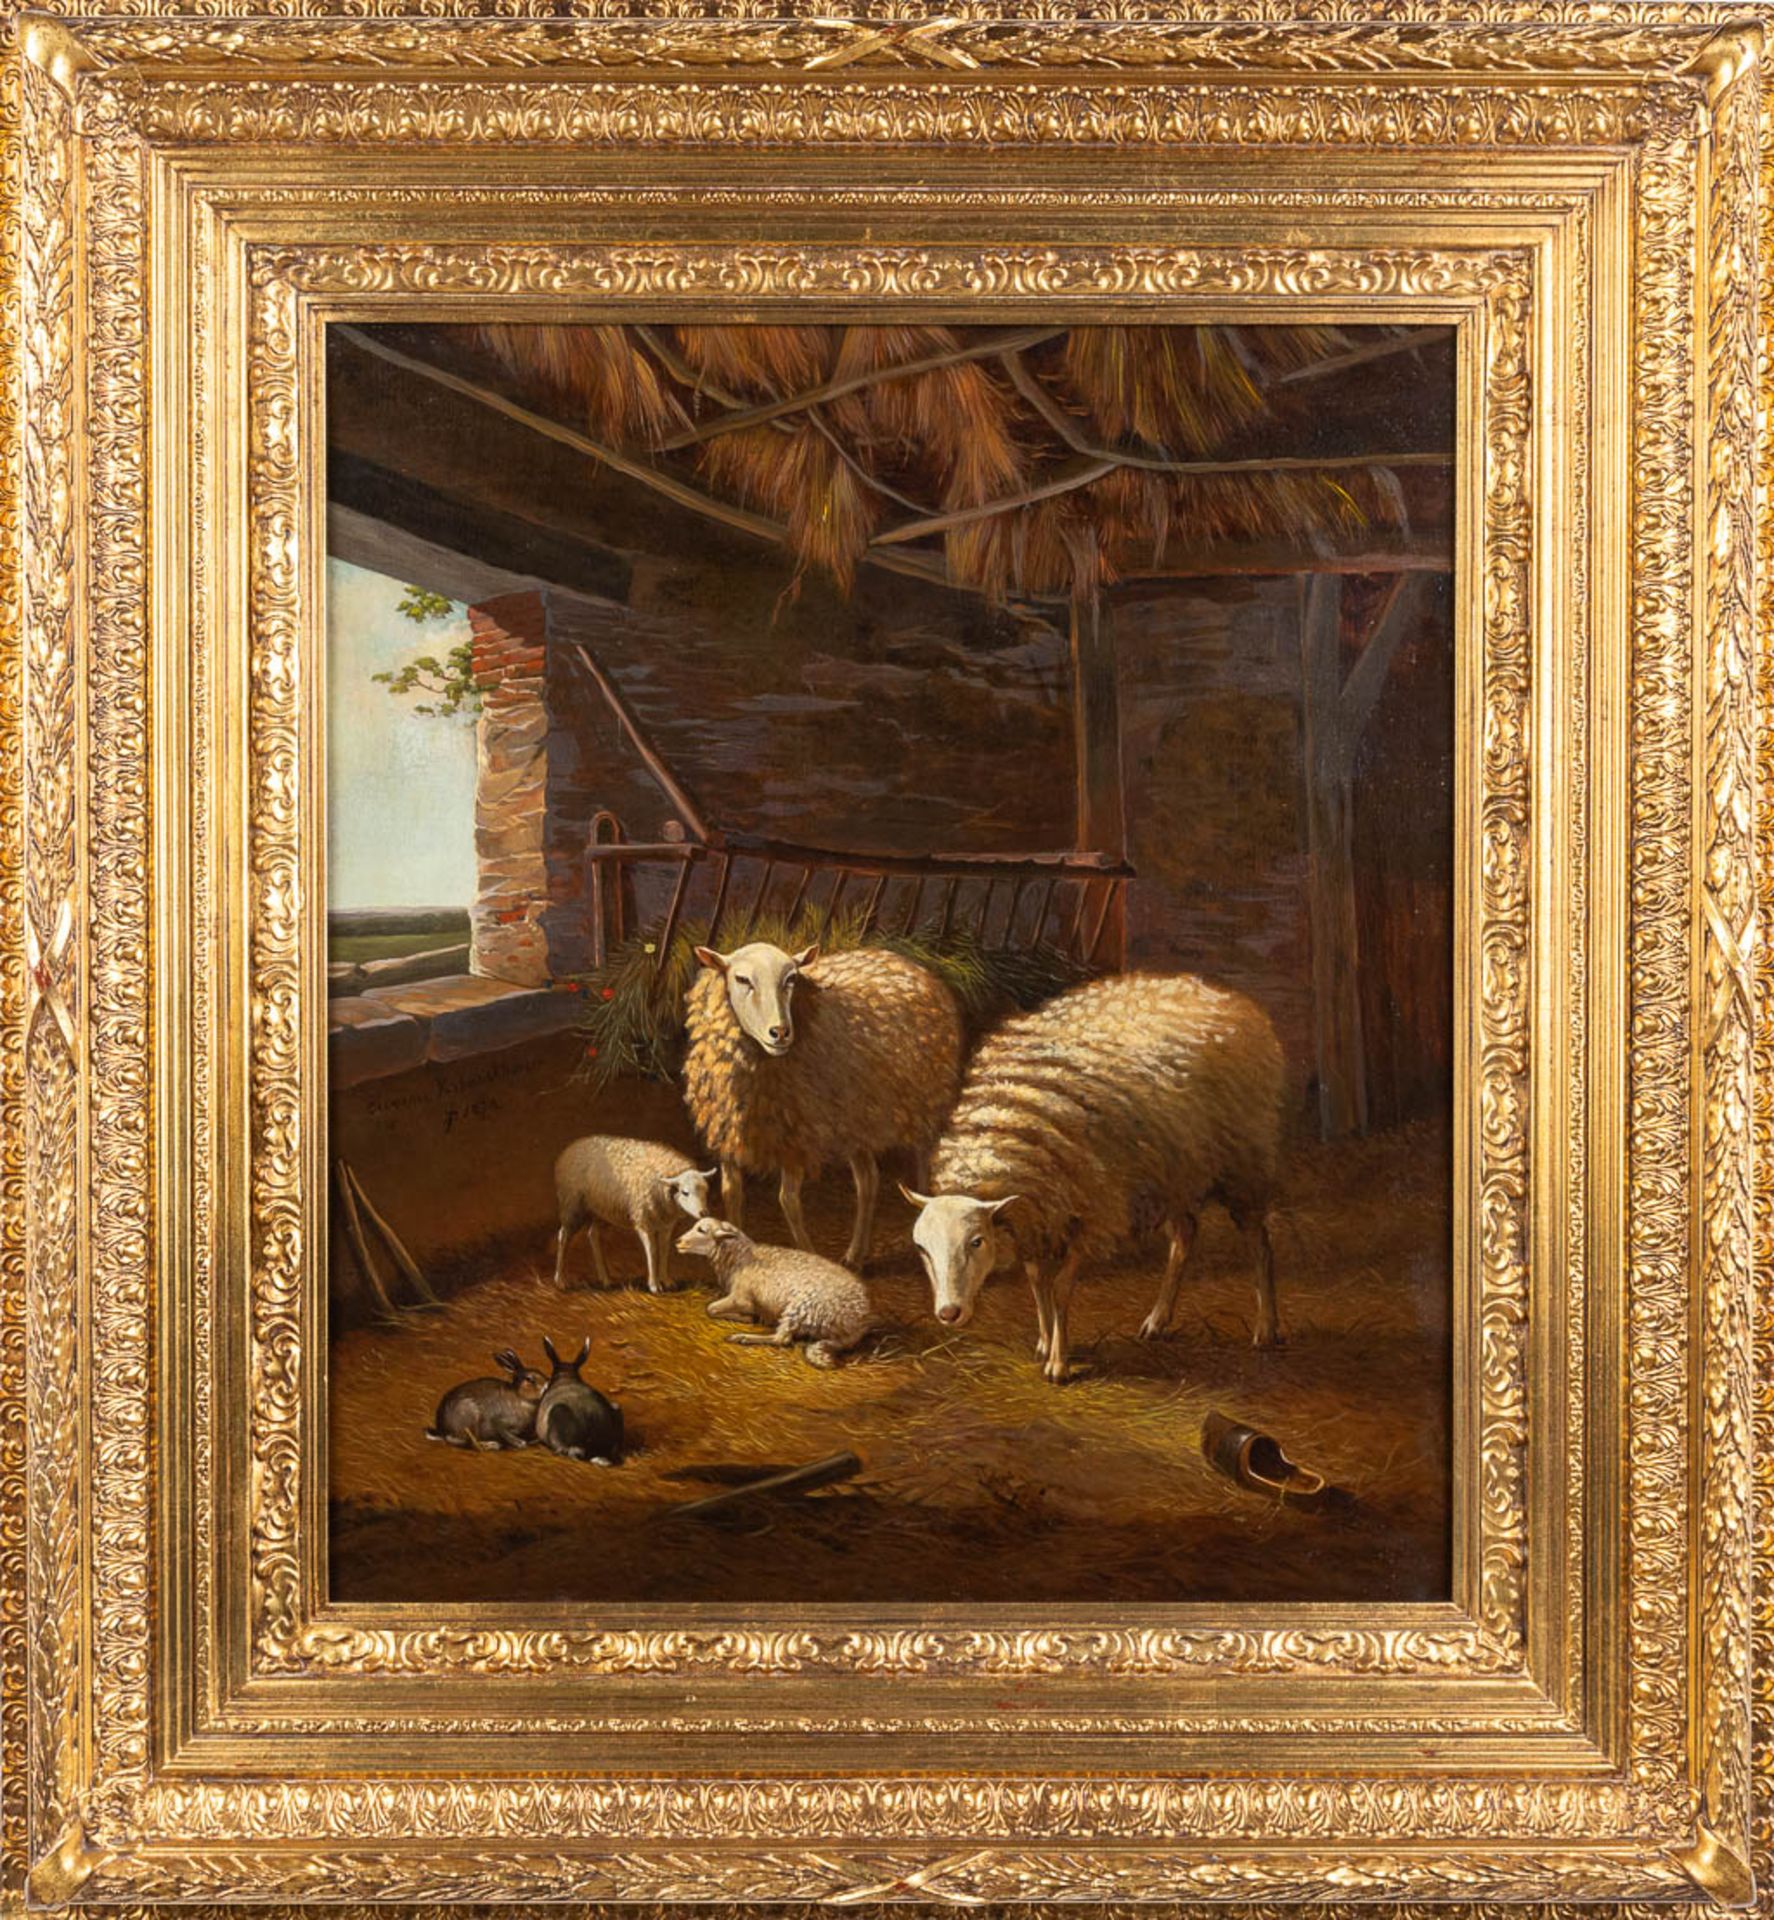 Sheep in a barn, a painting, oil on canvas. Framed in a nice frame. (W:61 x H:70 cm)